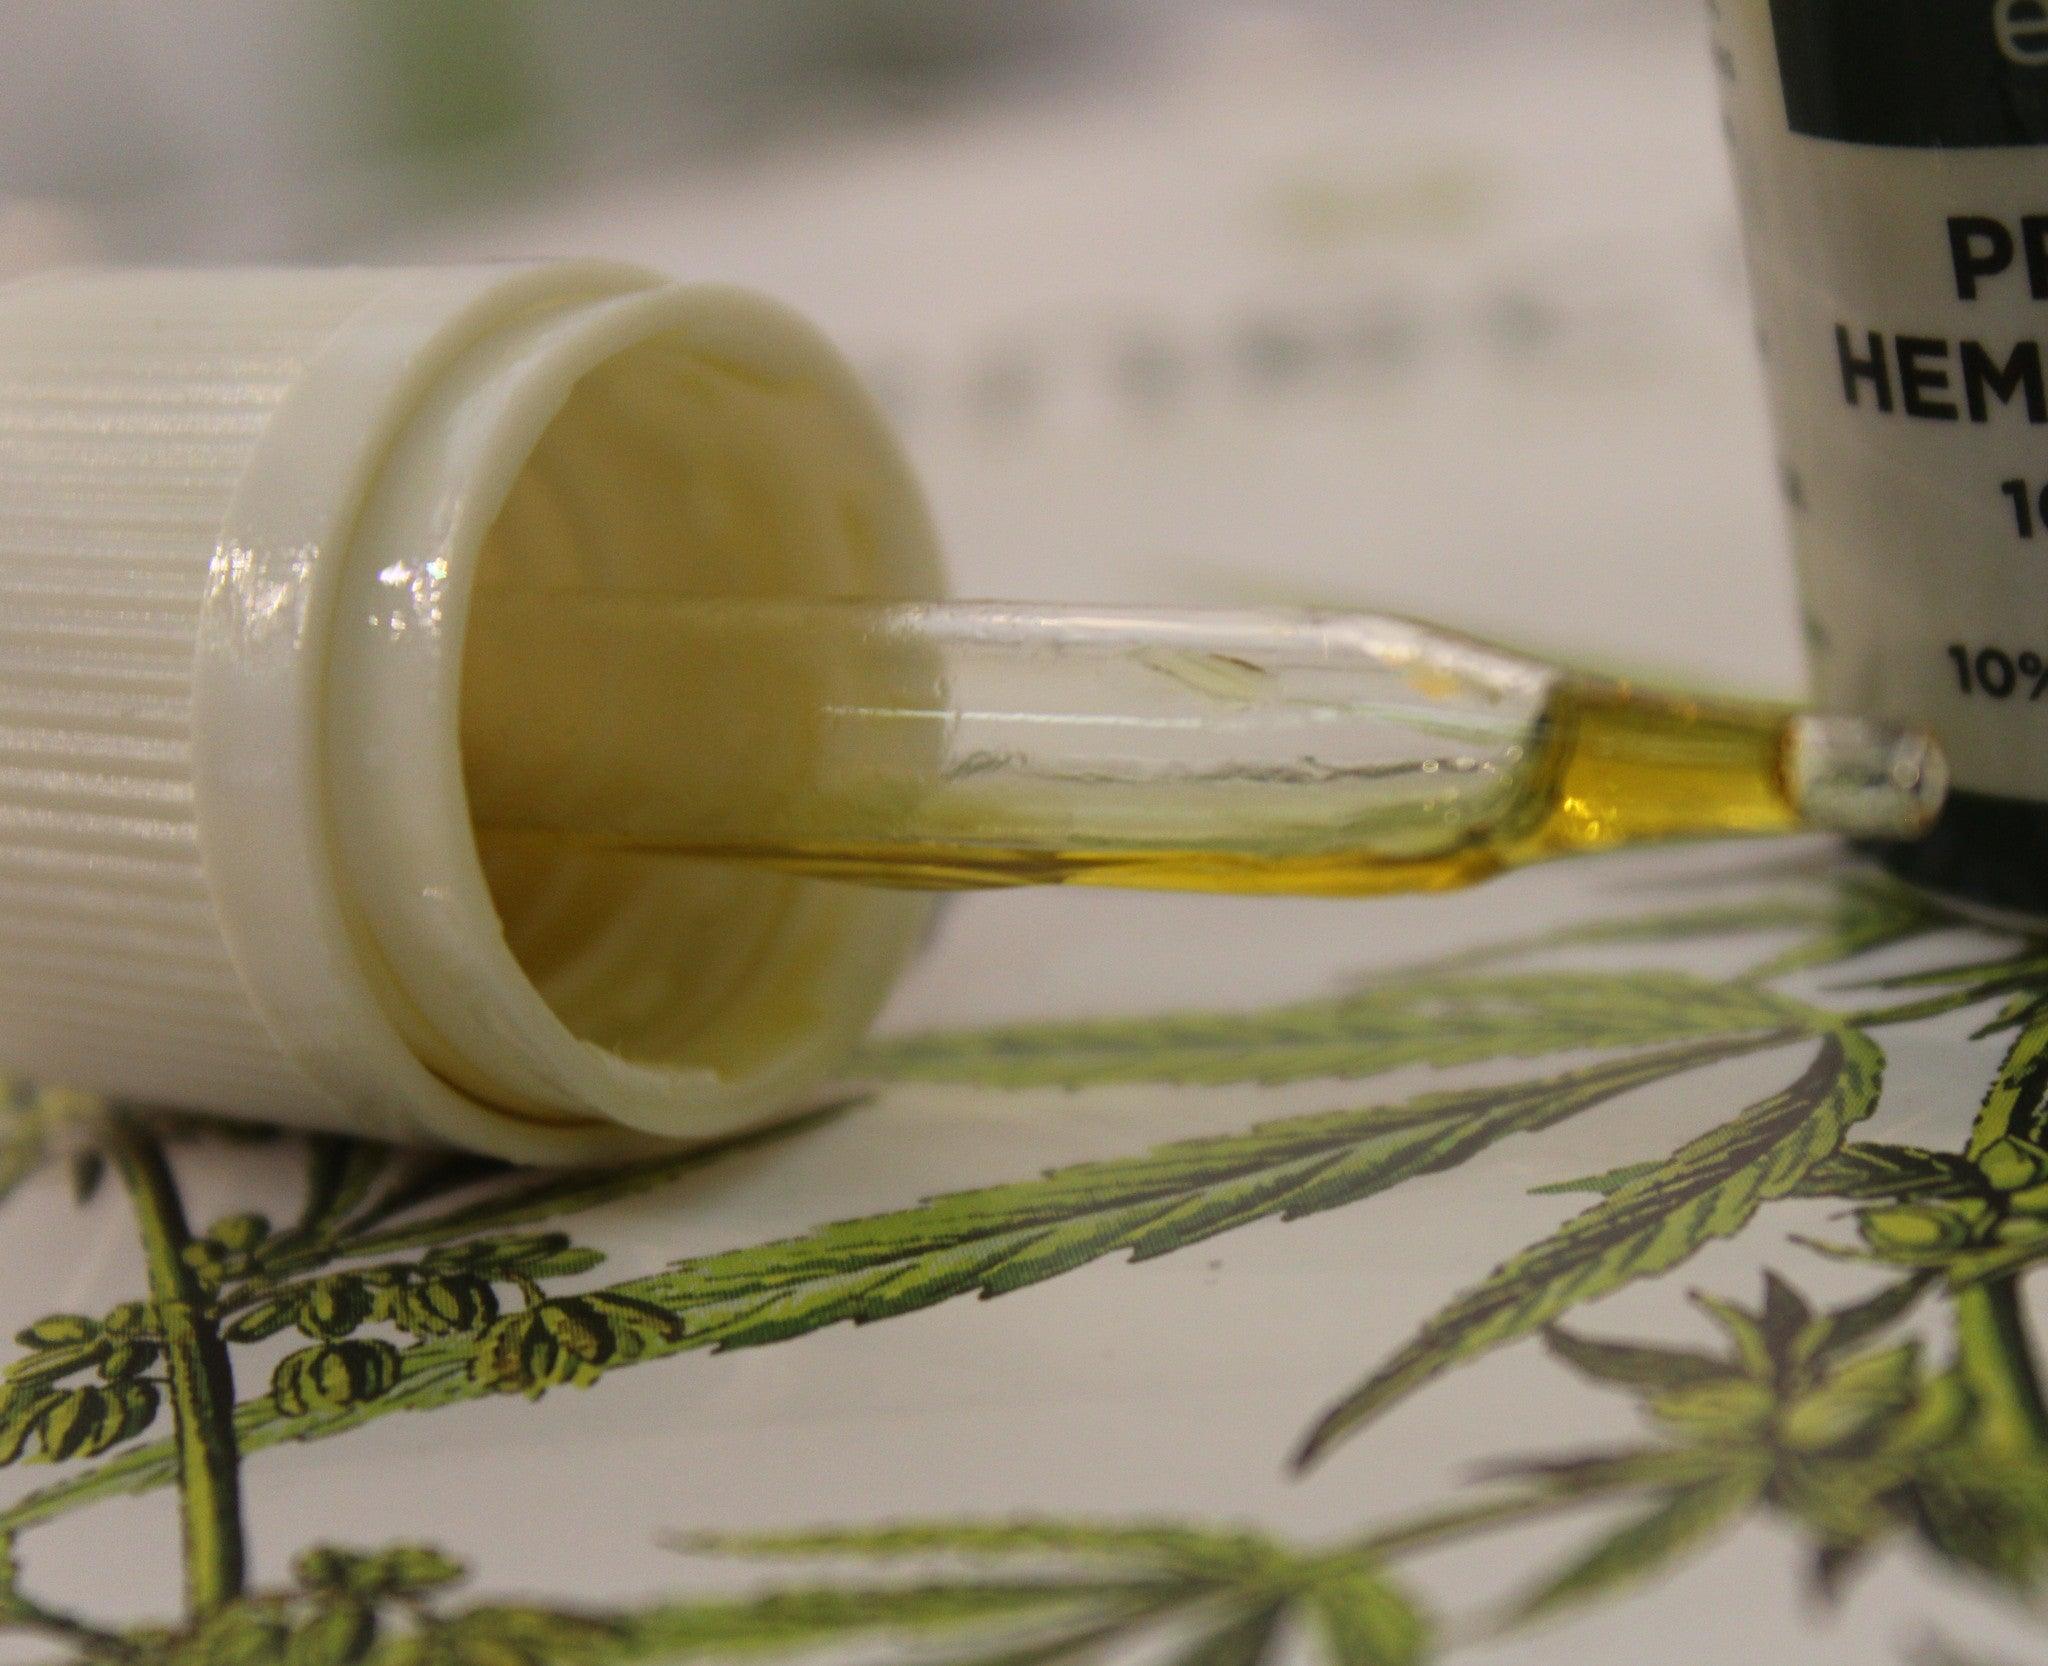 What answers the question “What is the best brand of medical CBD oil”? - Enecta.en